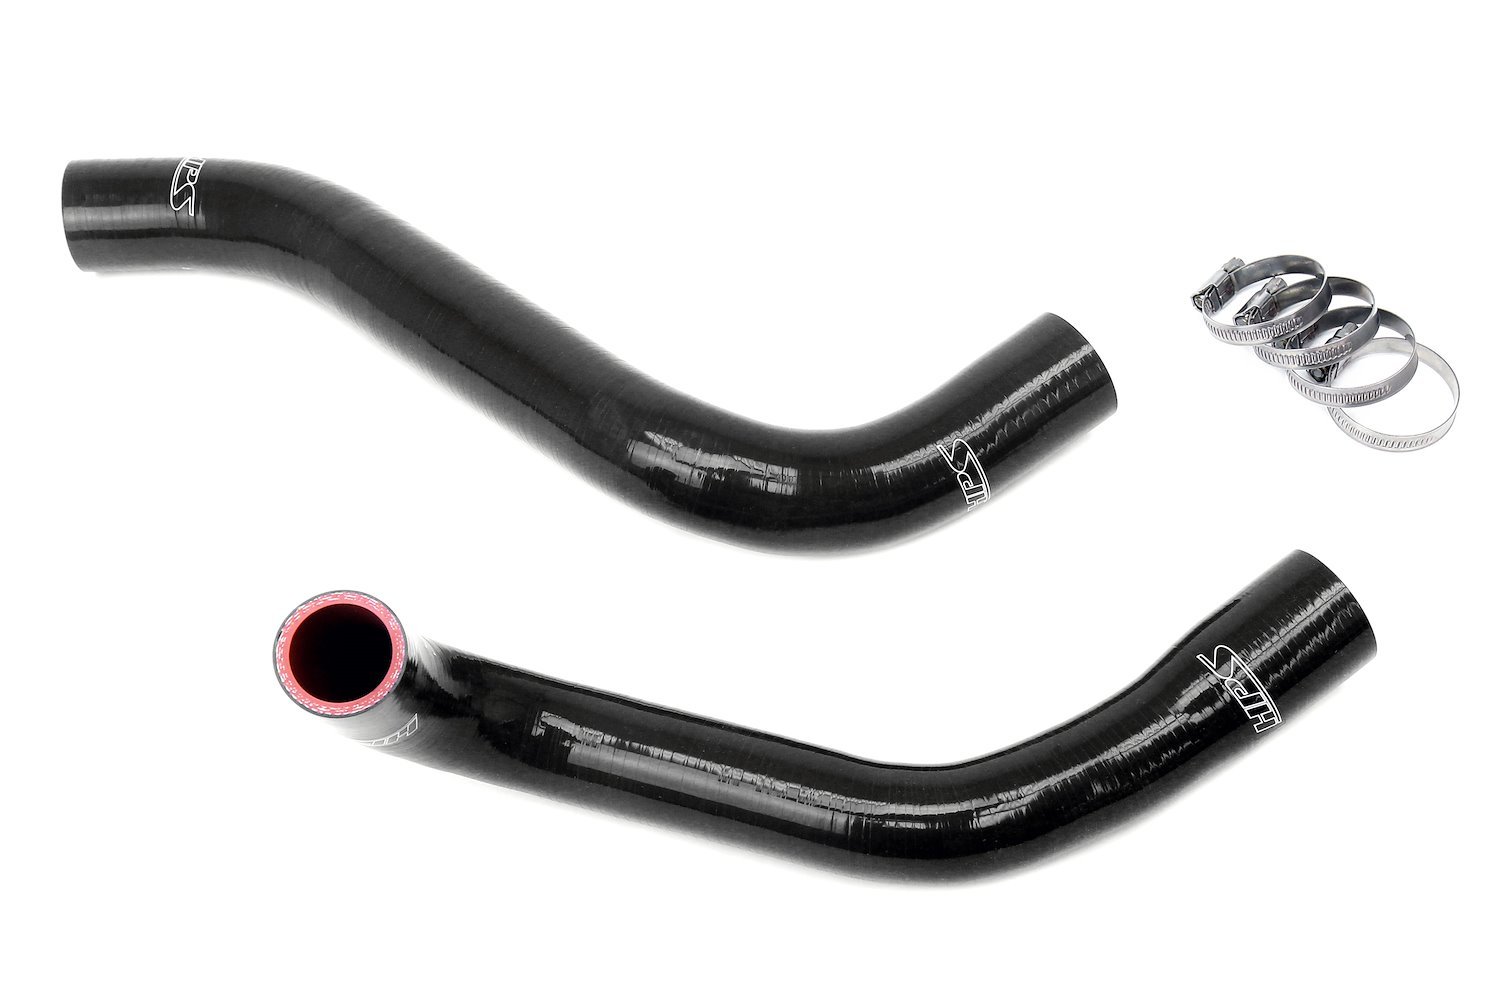 57-1819-BLK Radiator Hose Kit, 3-Ply Reinforced Silicone, Replaces Rubber Radiator Coolant Hoses